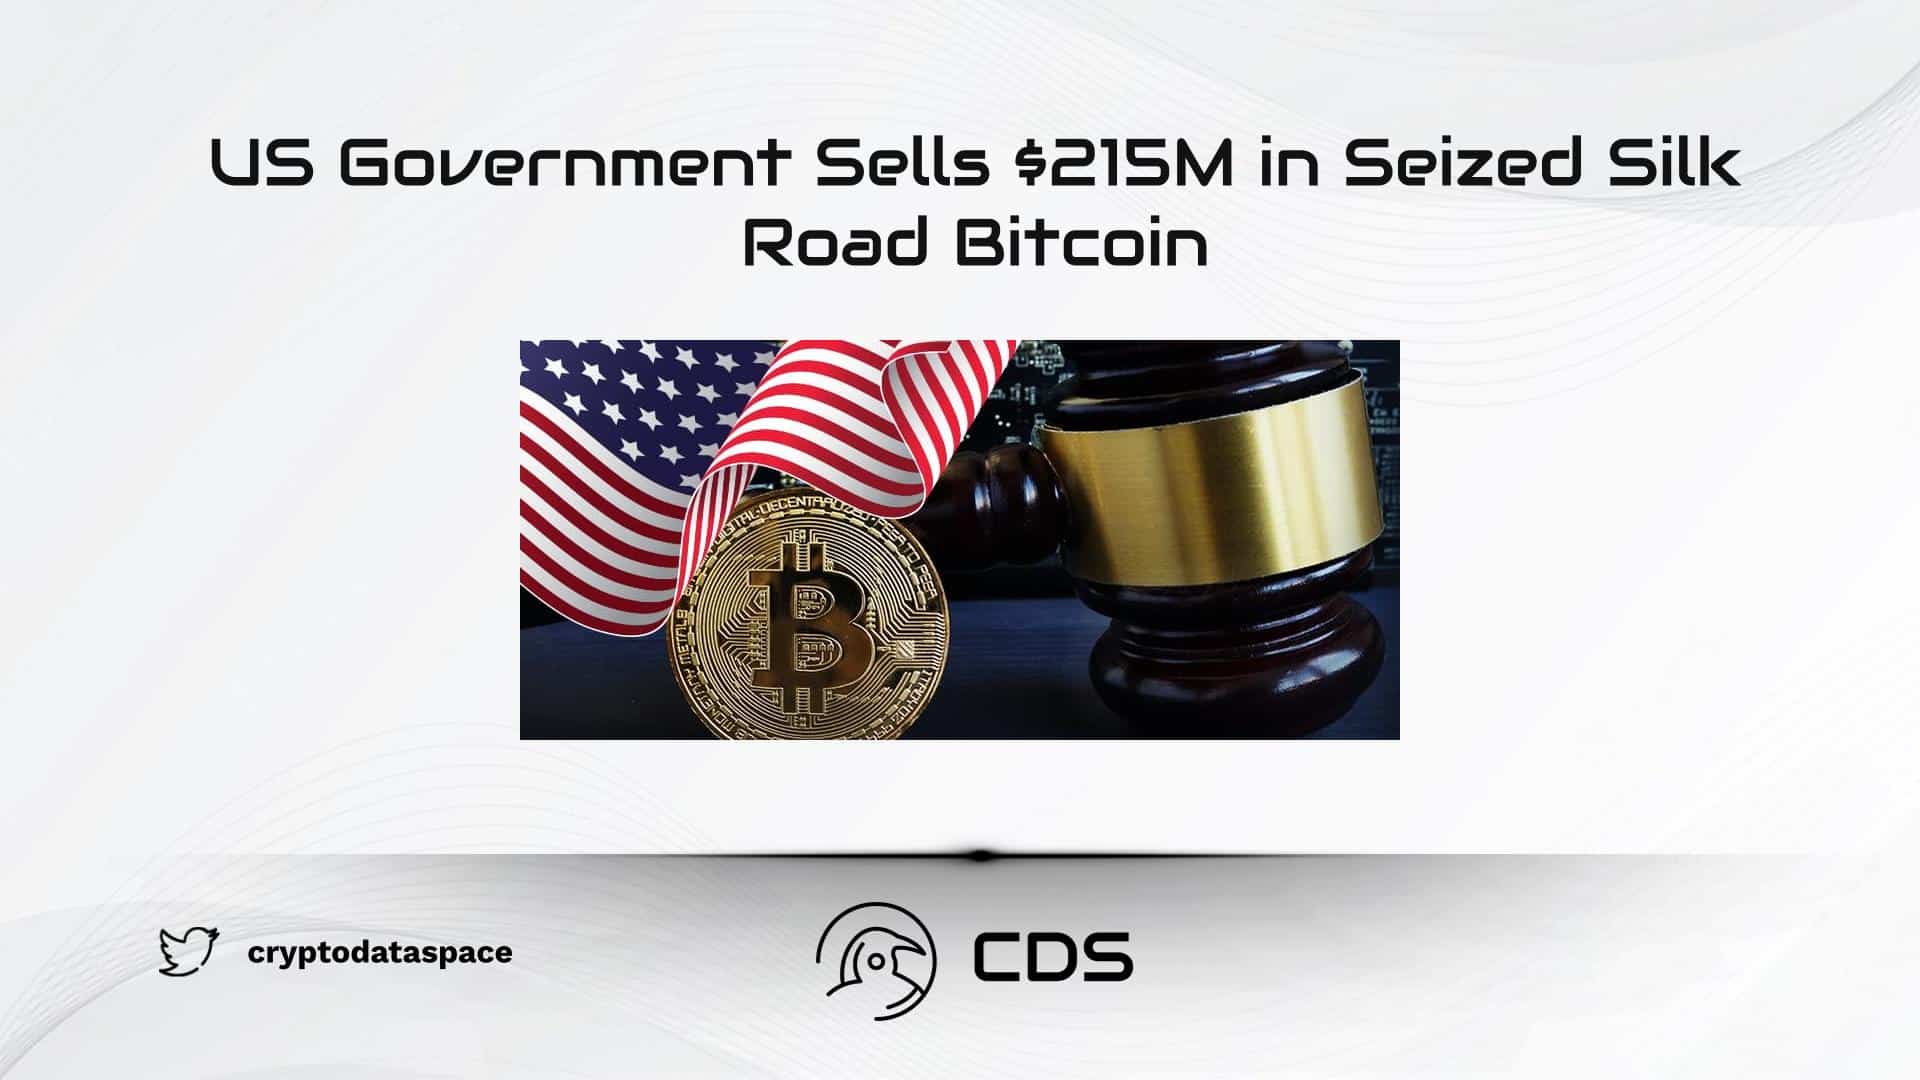 US Government Sells $215M in Seized Silk Road Bitcoin